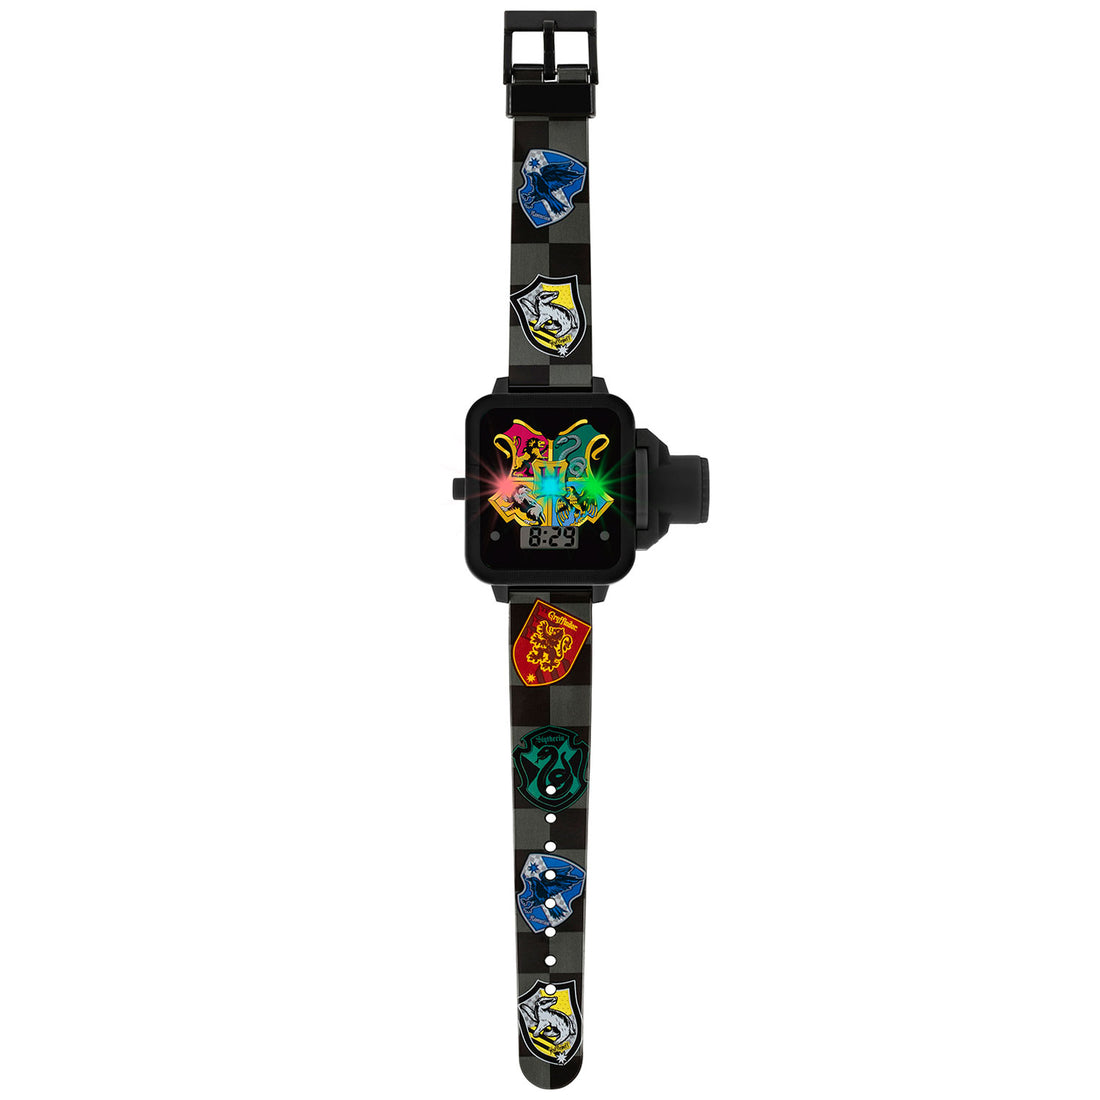 Harry Potter Junior Projection Watch - Officially licensed merchandise.